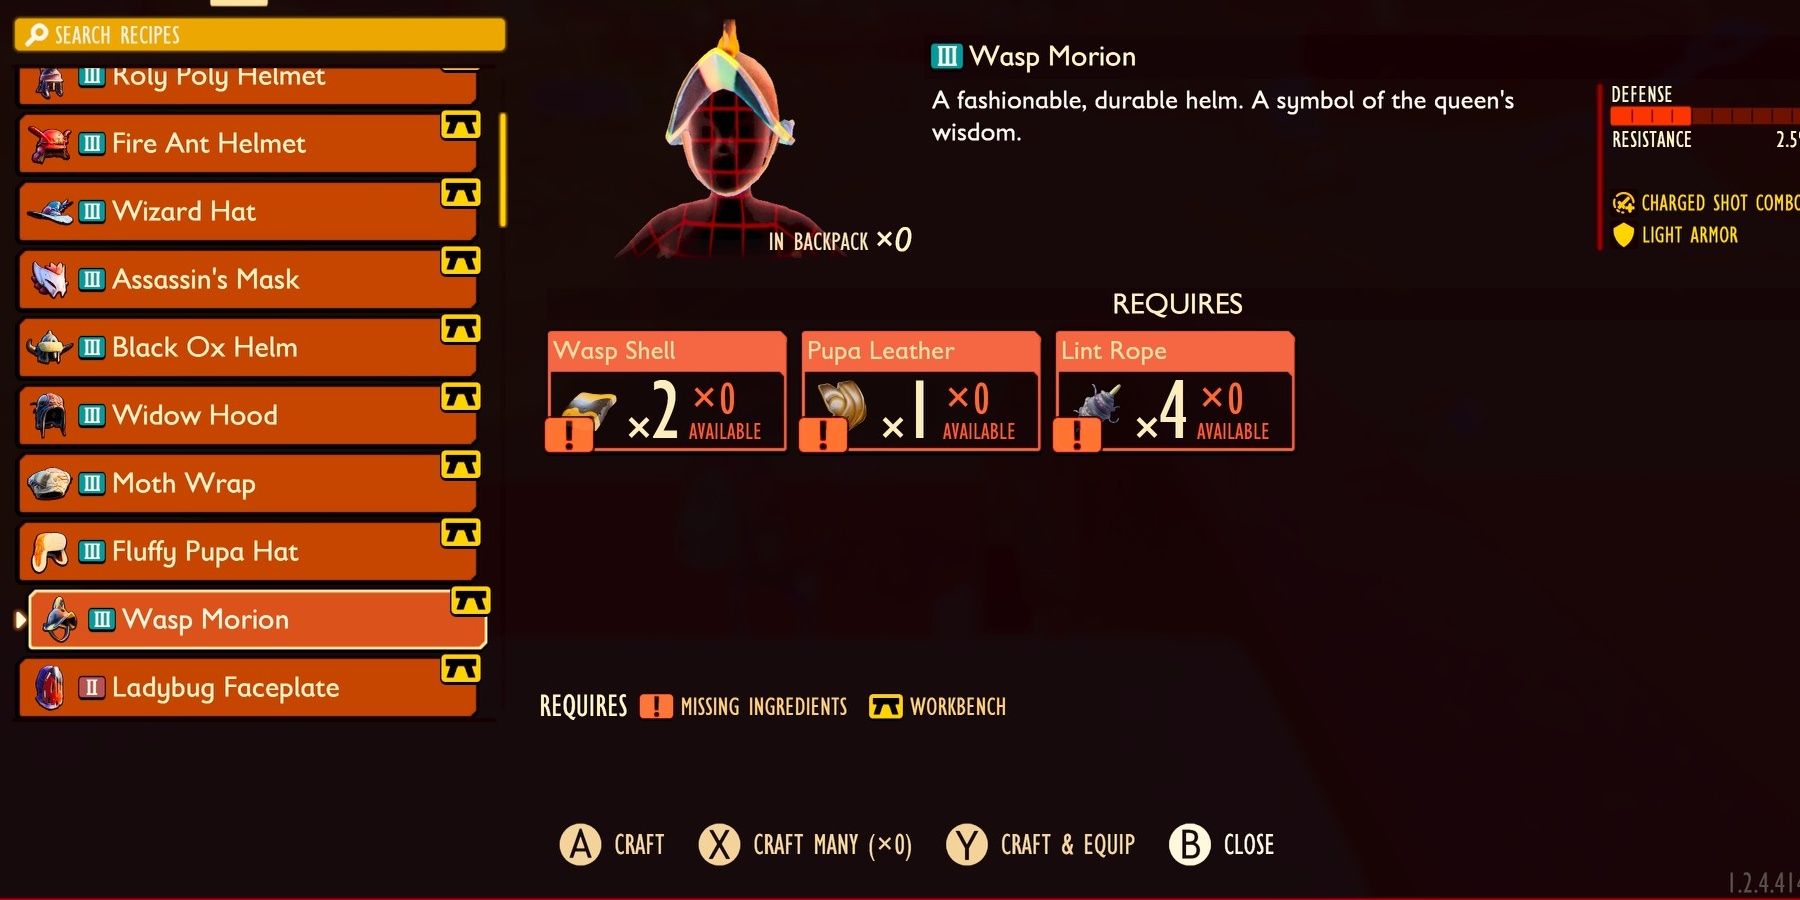 The Wasp Morion helmet in the inventory in Grounded.